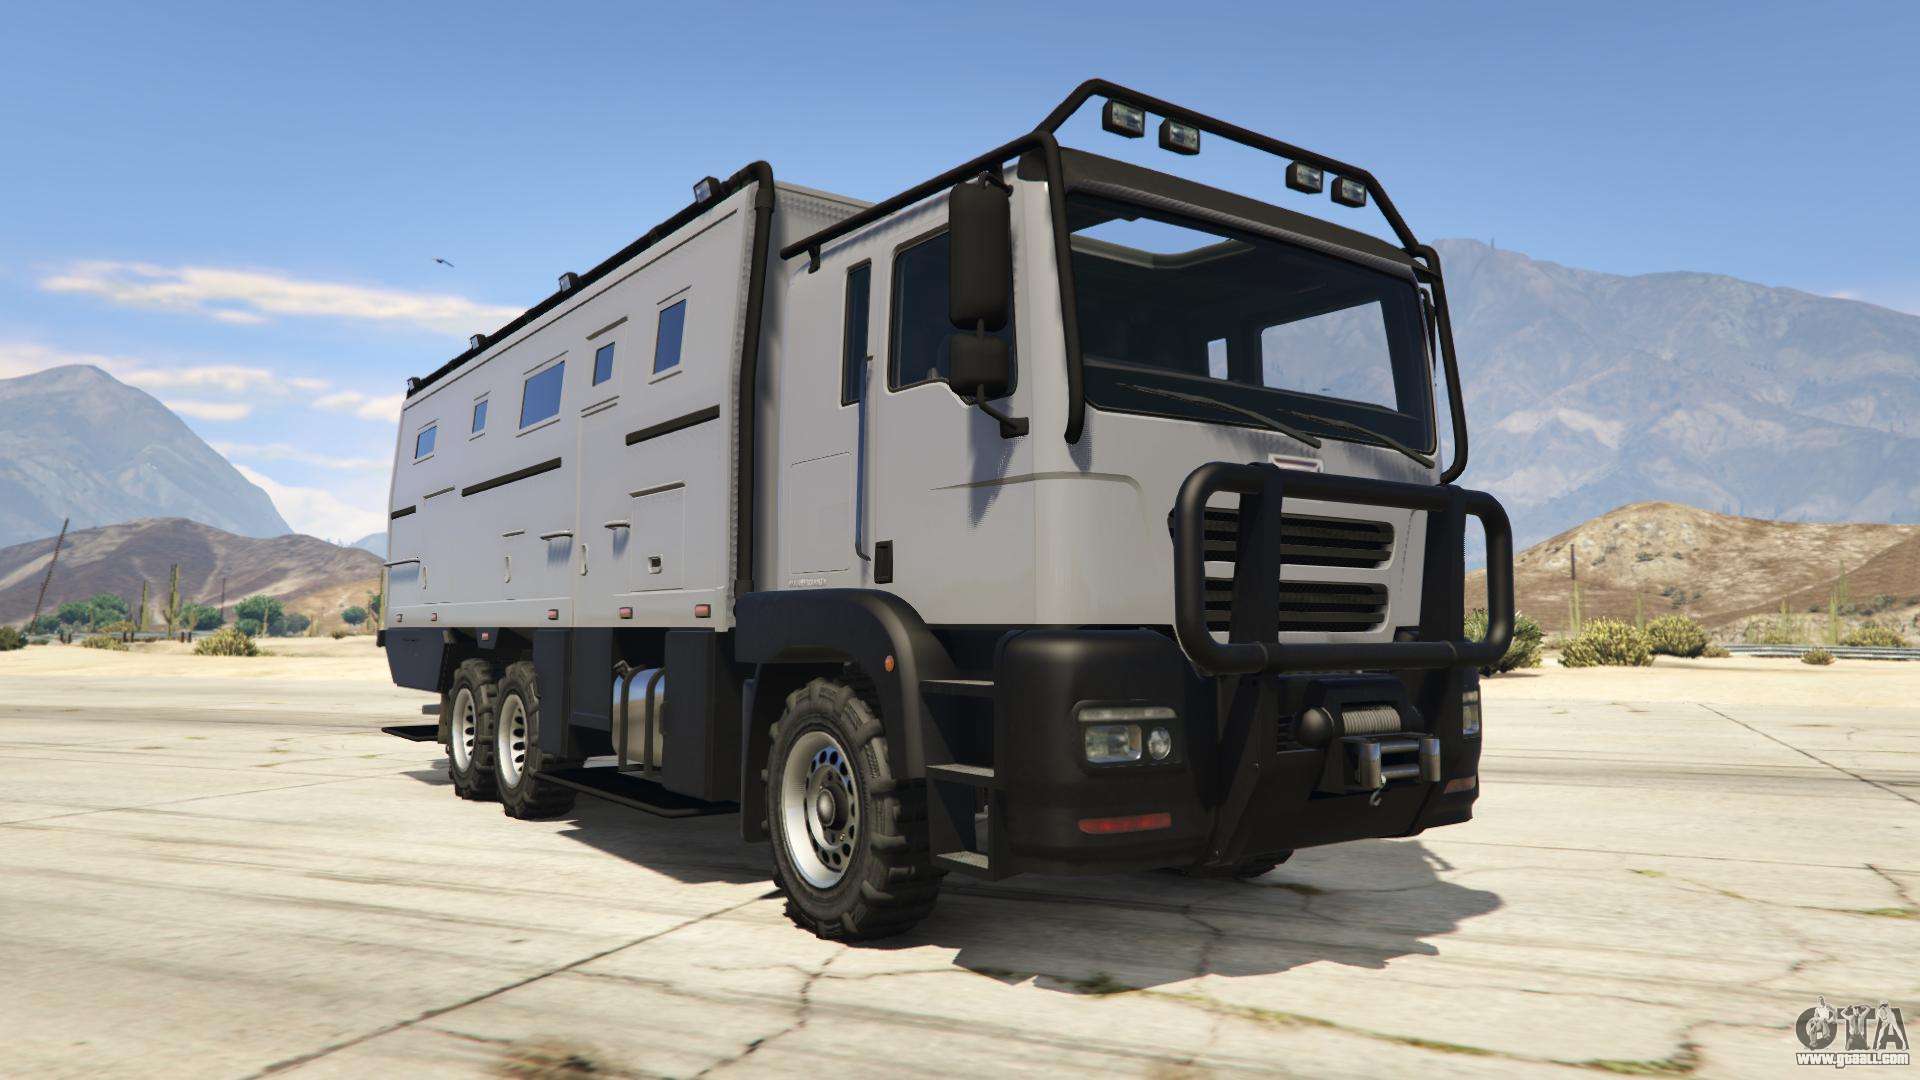 HVY Brickade from GTA 5 - front view